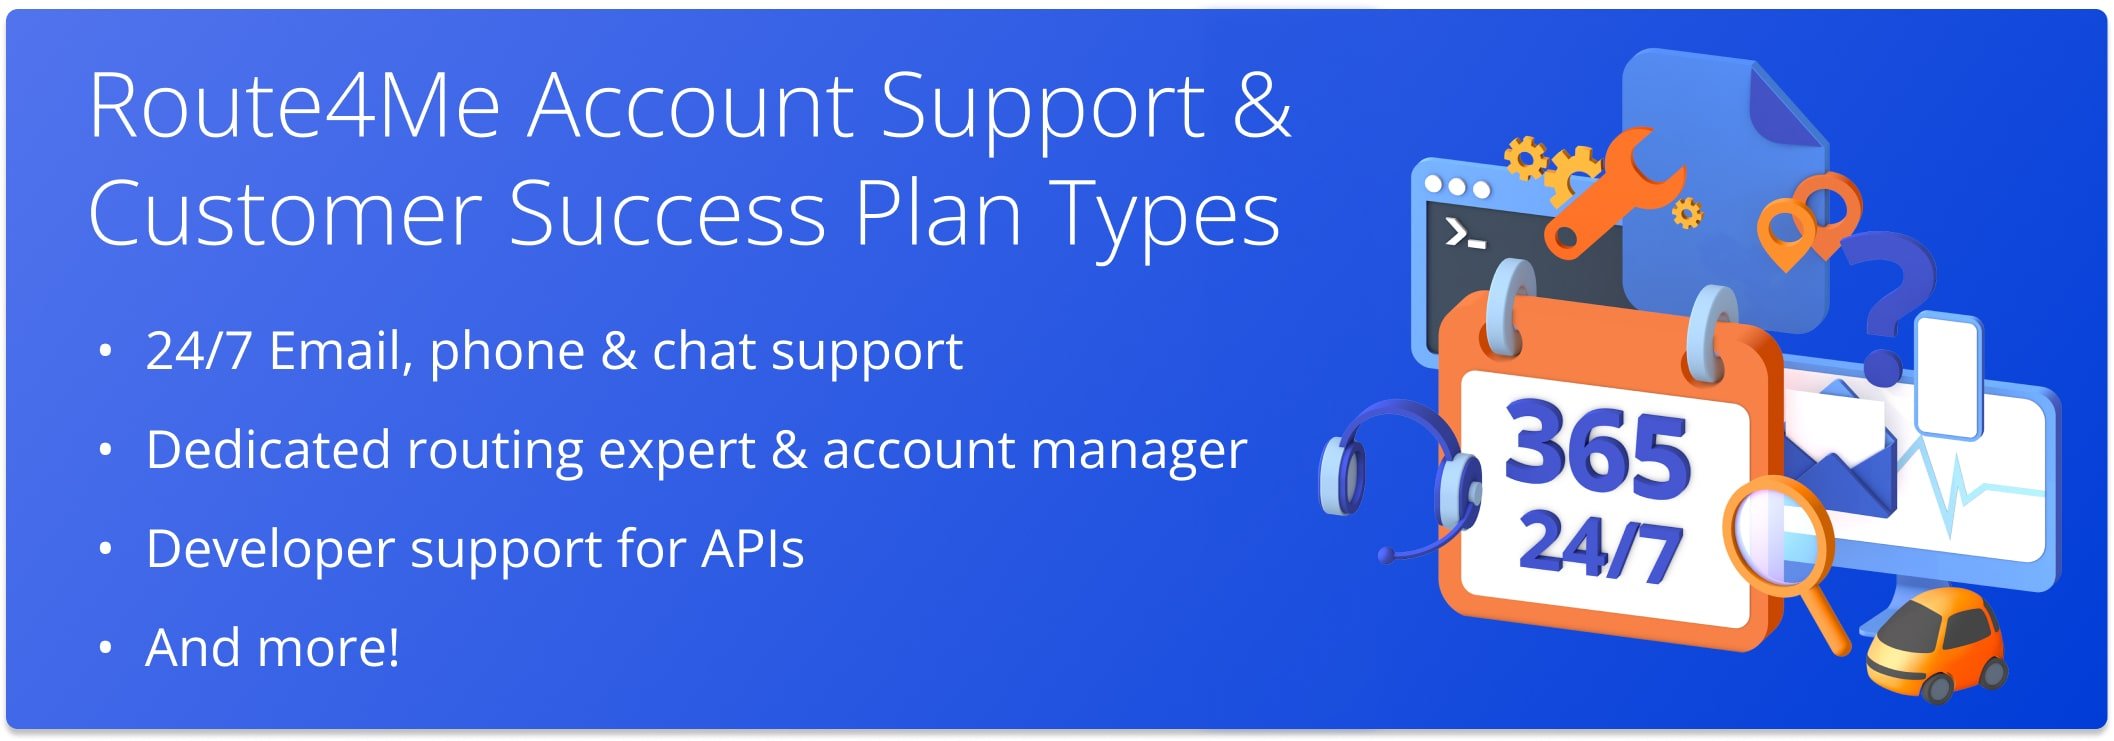 Route4Me Account Support: 24/7 email, phone and live chat support, dedicated routing experts and account managers, developer support for APIs, and more.